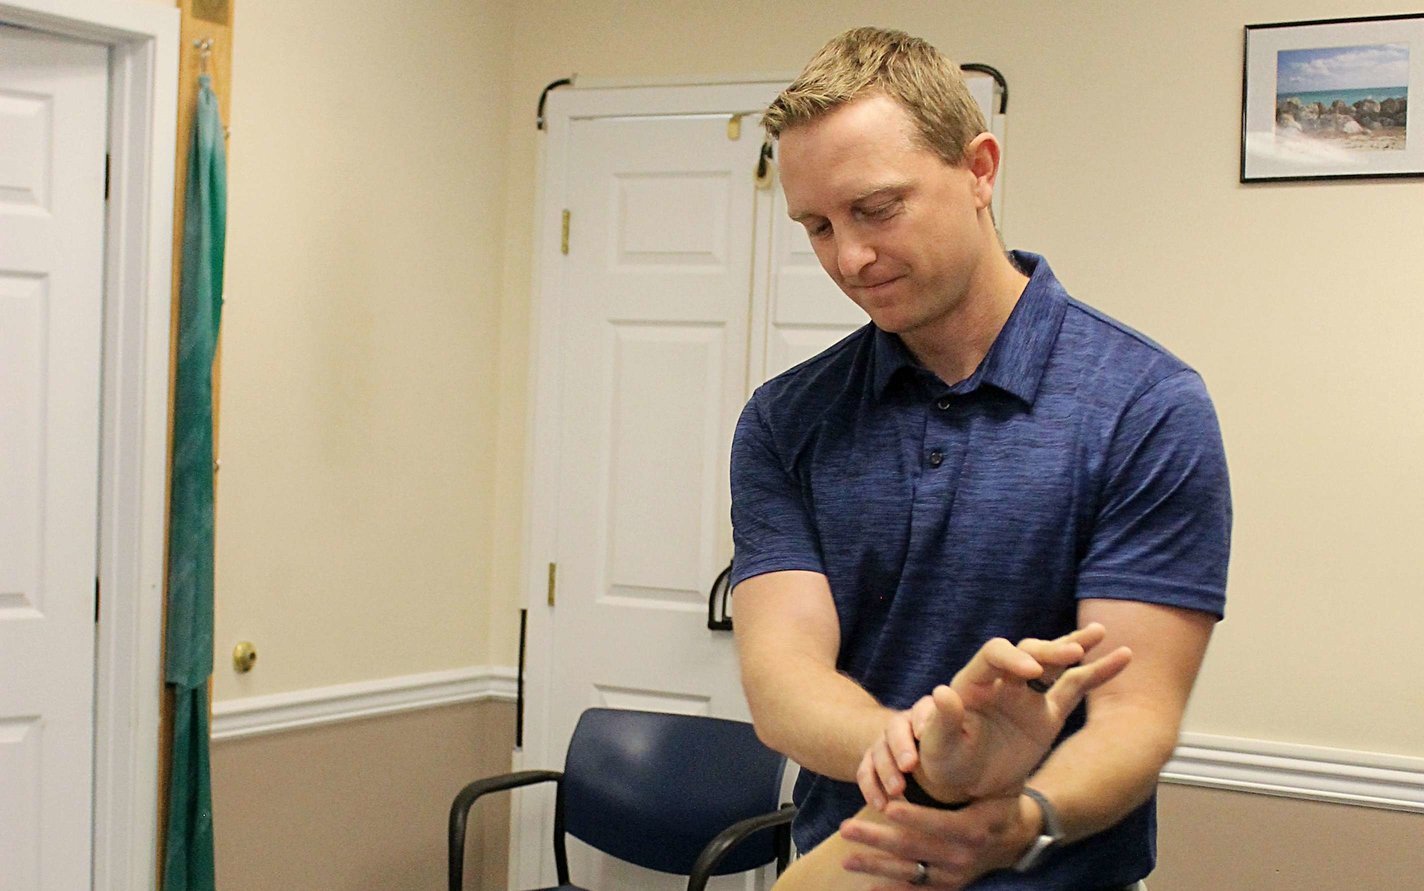 physical therapist Matt with a patient